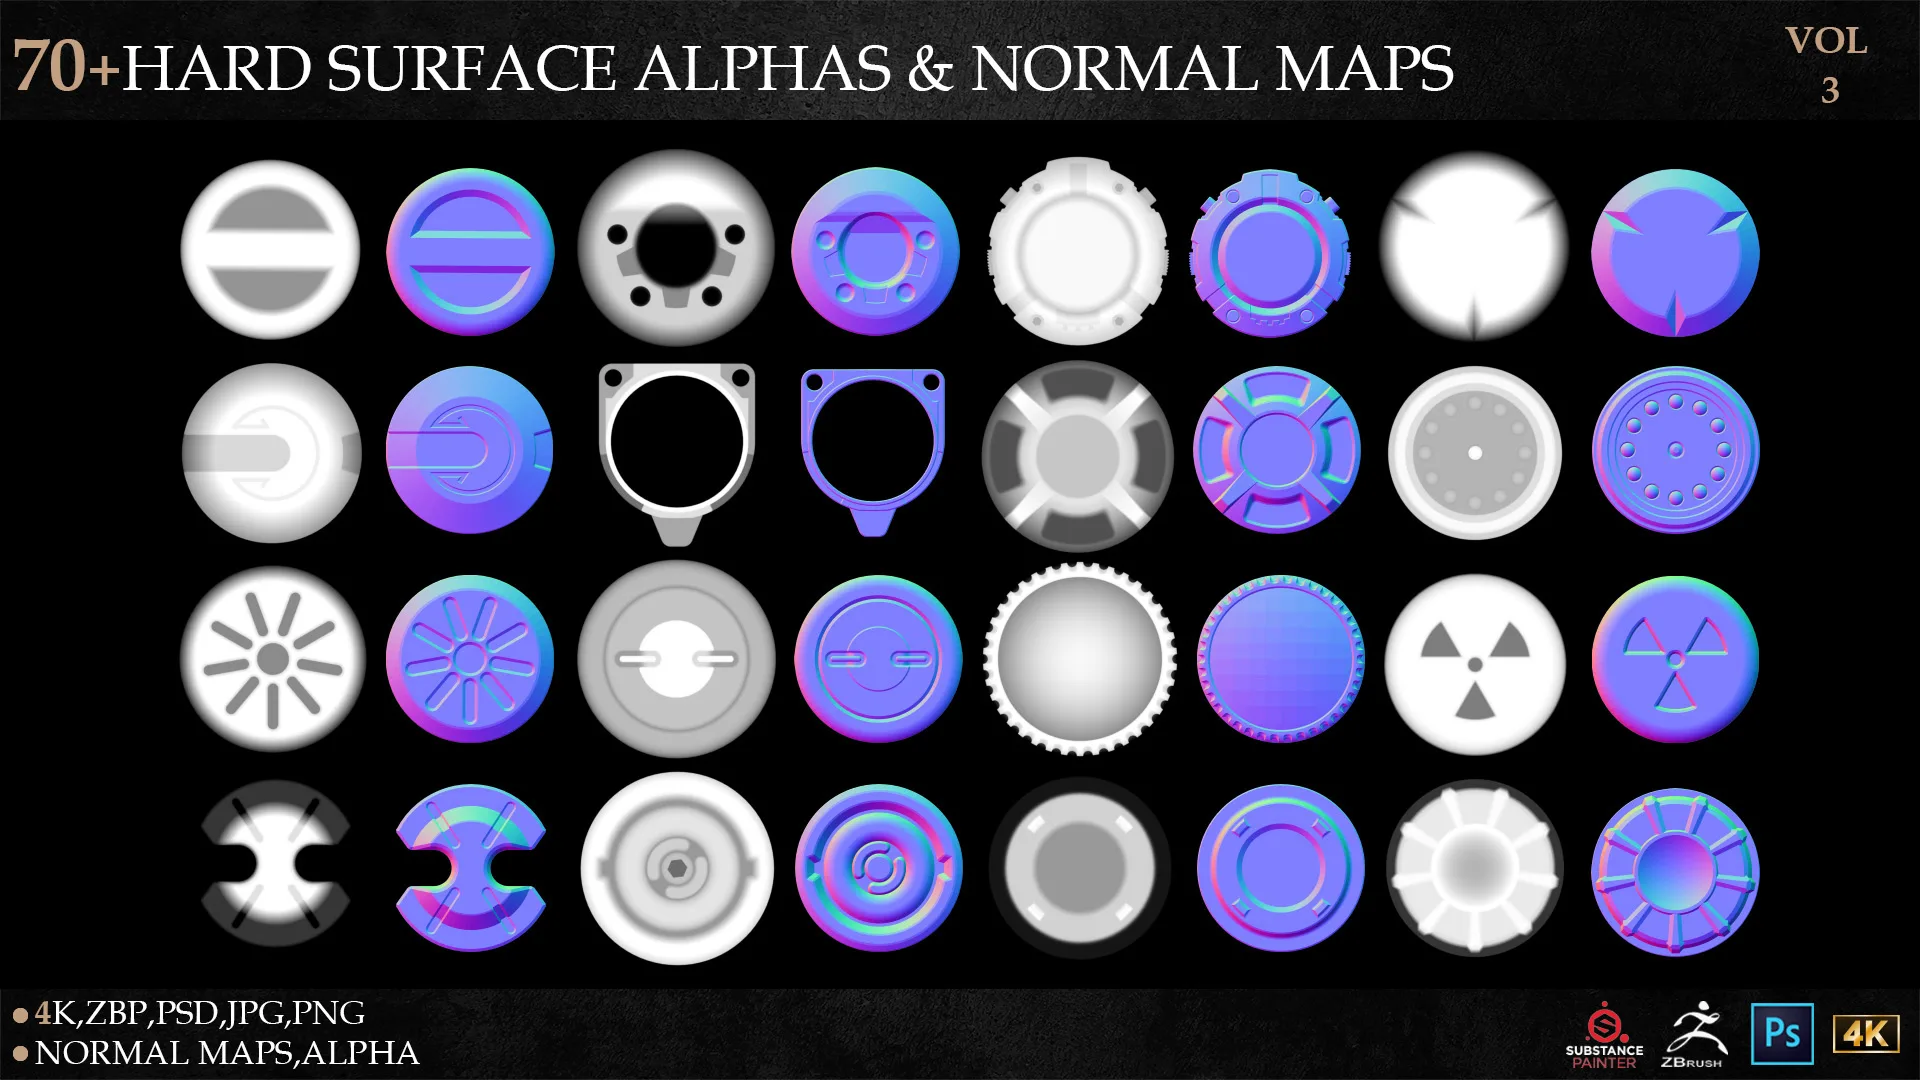 70+HARD SURFACE ALPHAS & NORMAL MAPS-VOL 3